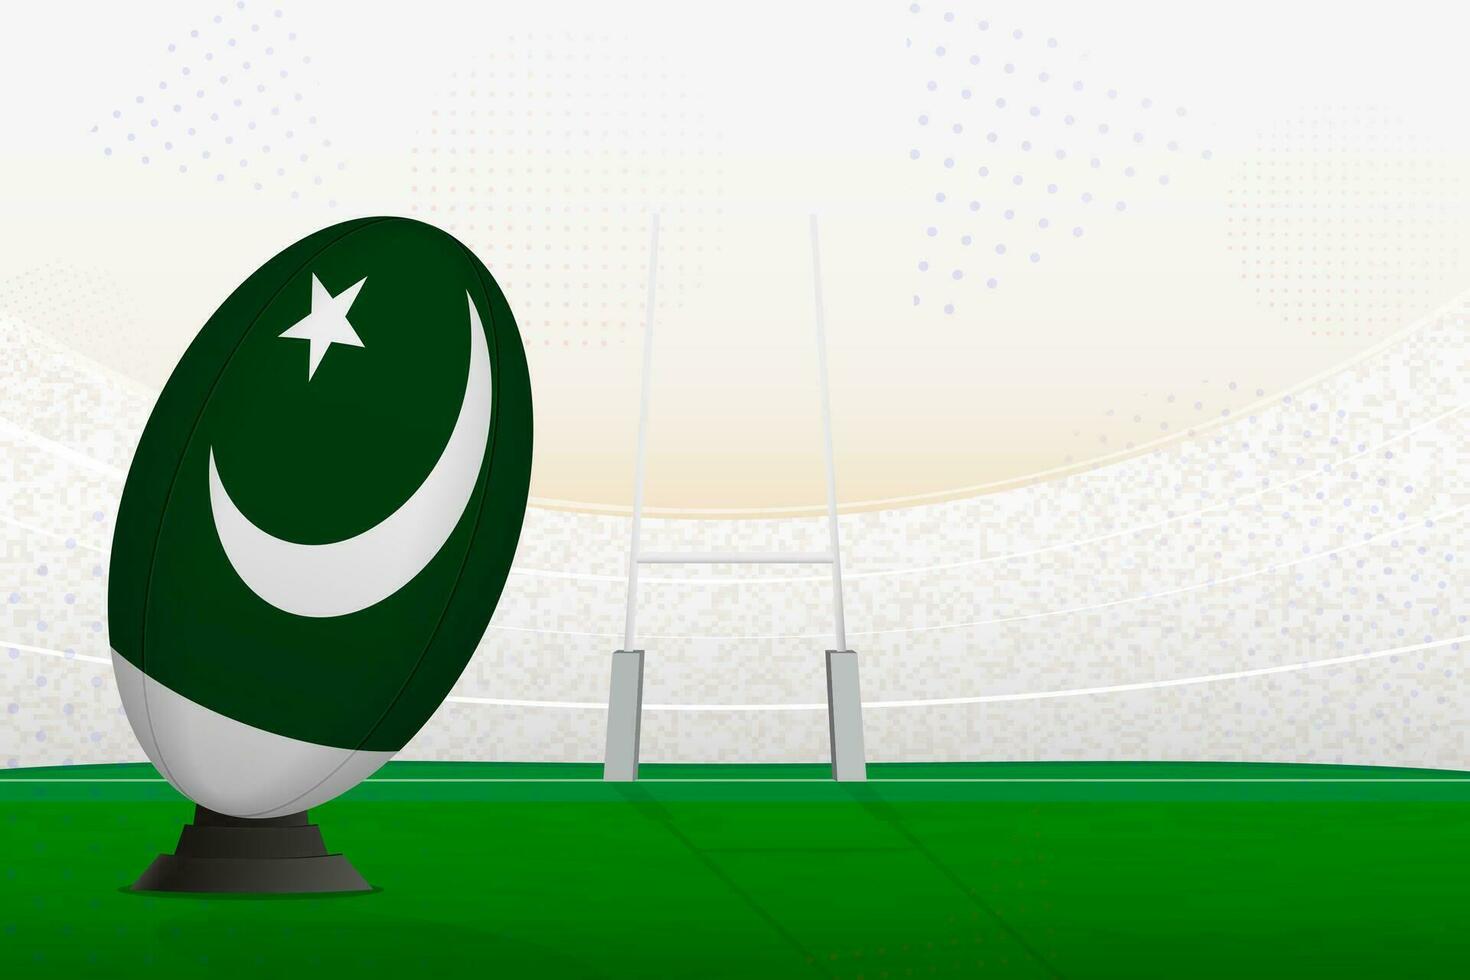 Pakistan national team rugby ball on rugby stadium and goal posts, preparing for a penalty or free kick. vector